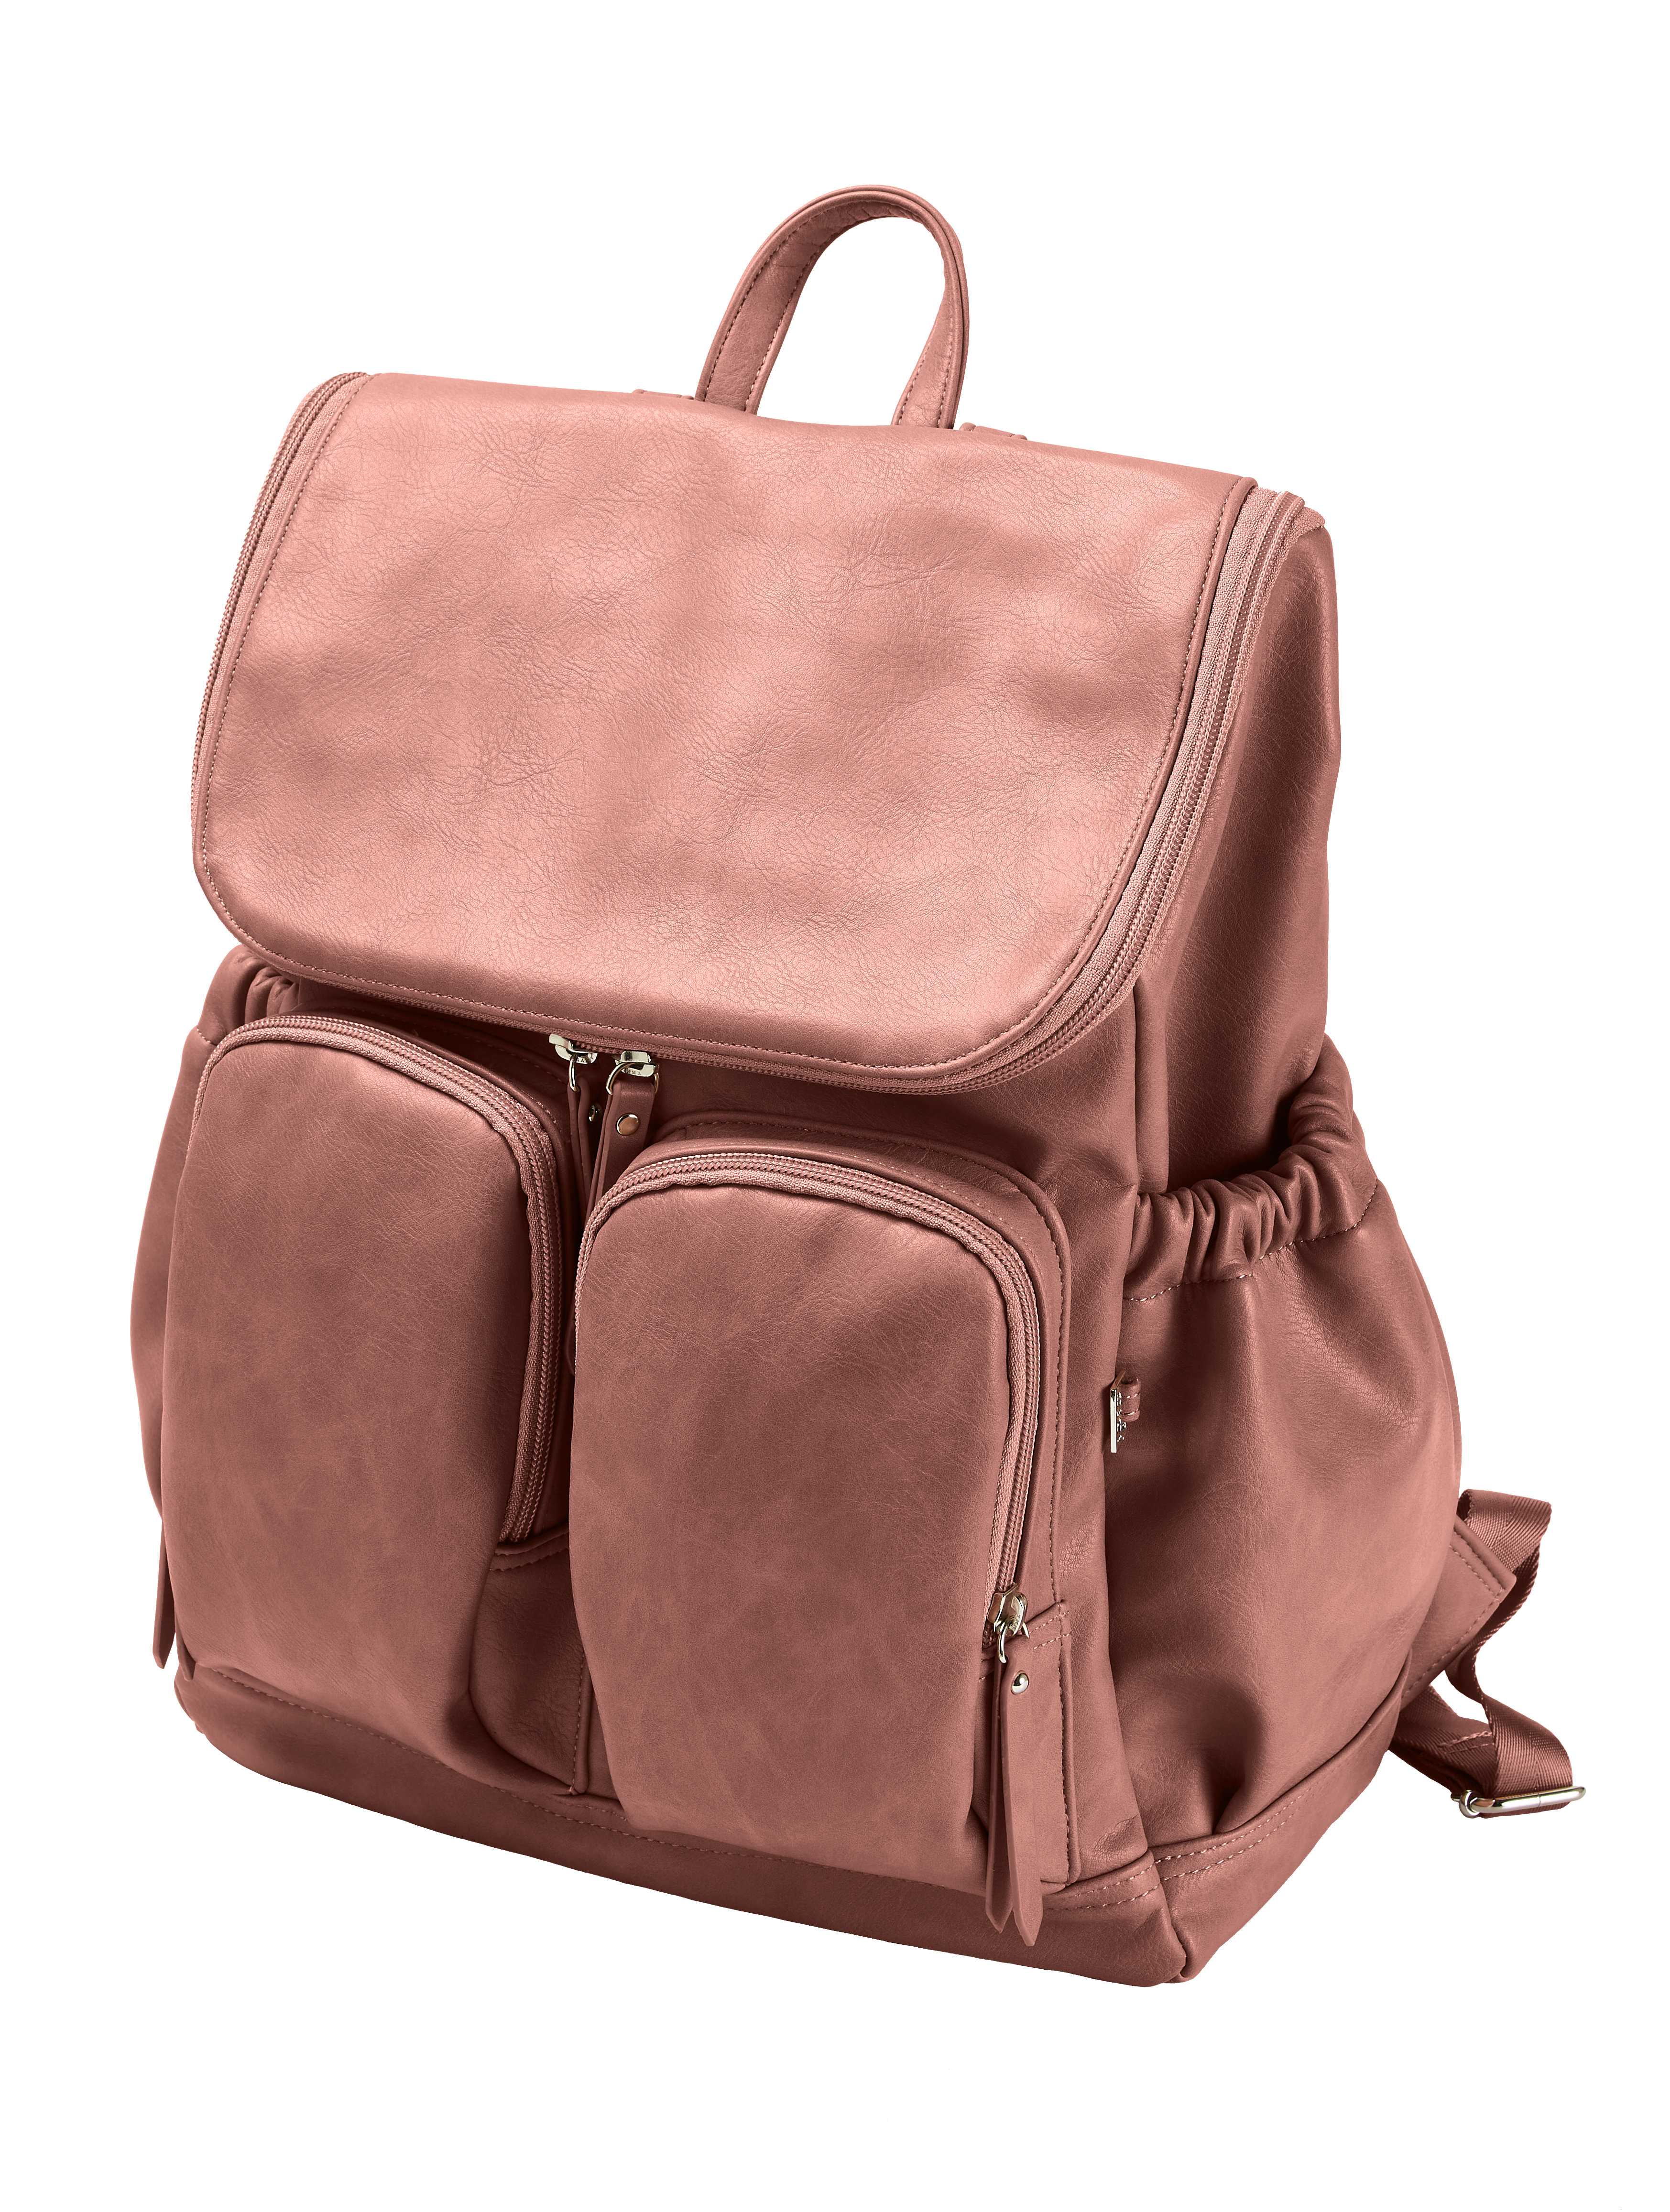 OiOi Faux Leather Nappy Backpack - Dusty Rose